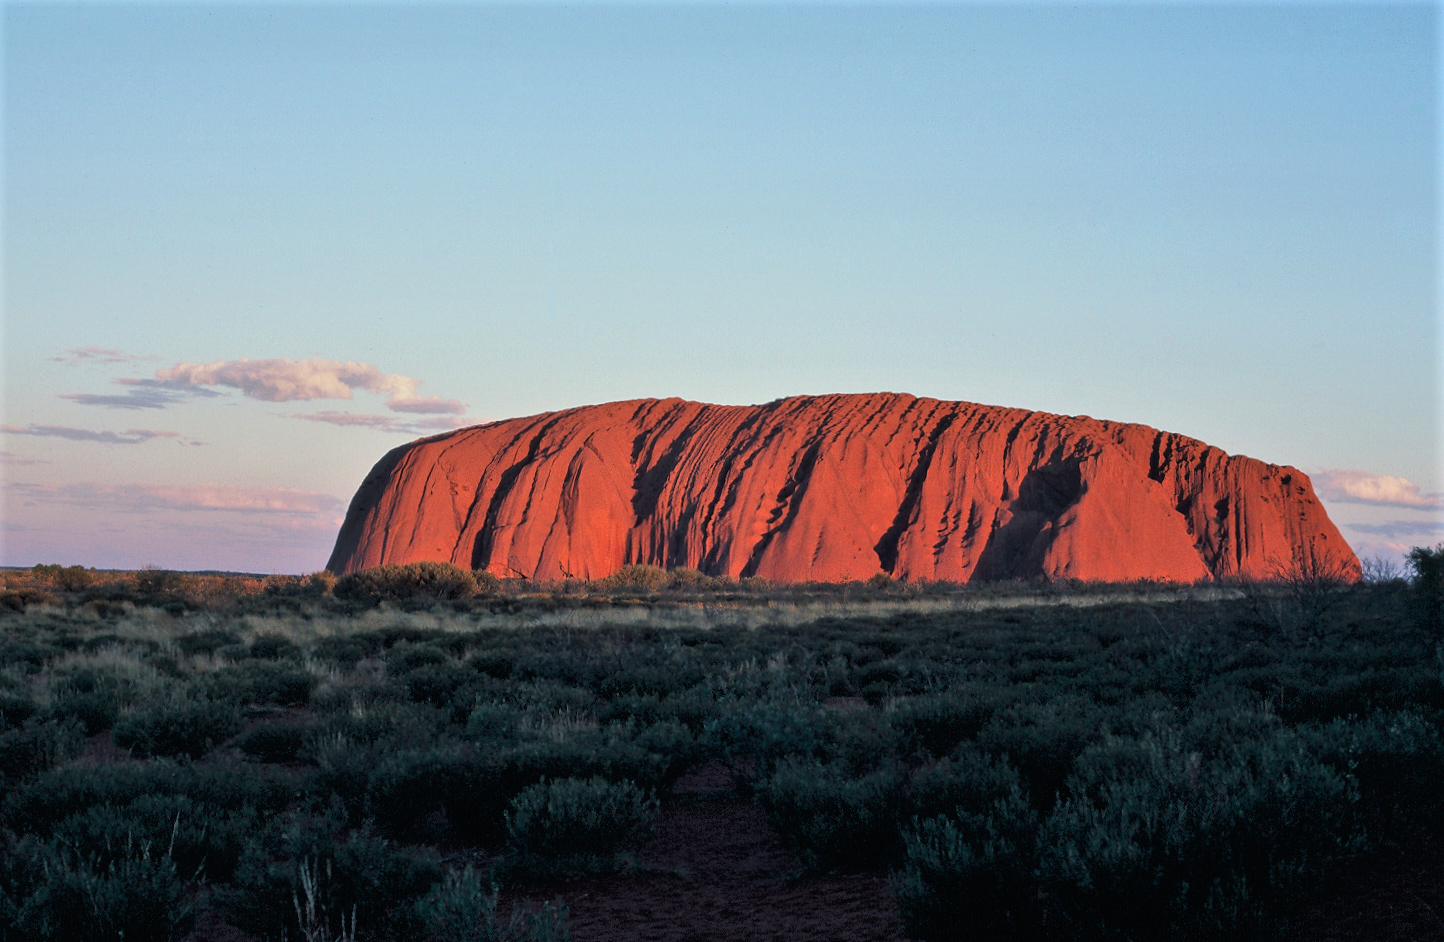 Uluru, or Ayers Rock, is a massive sandstone monolith in the Northern Territory. by lonewolf6738